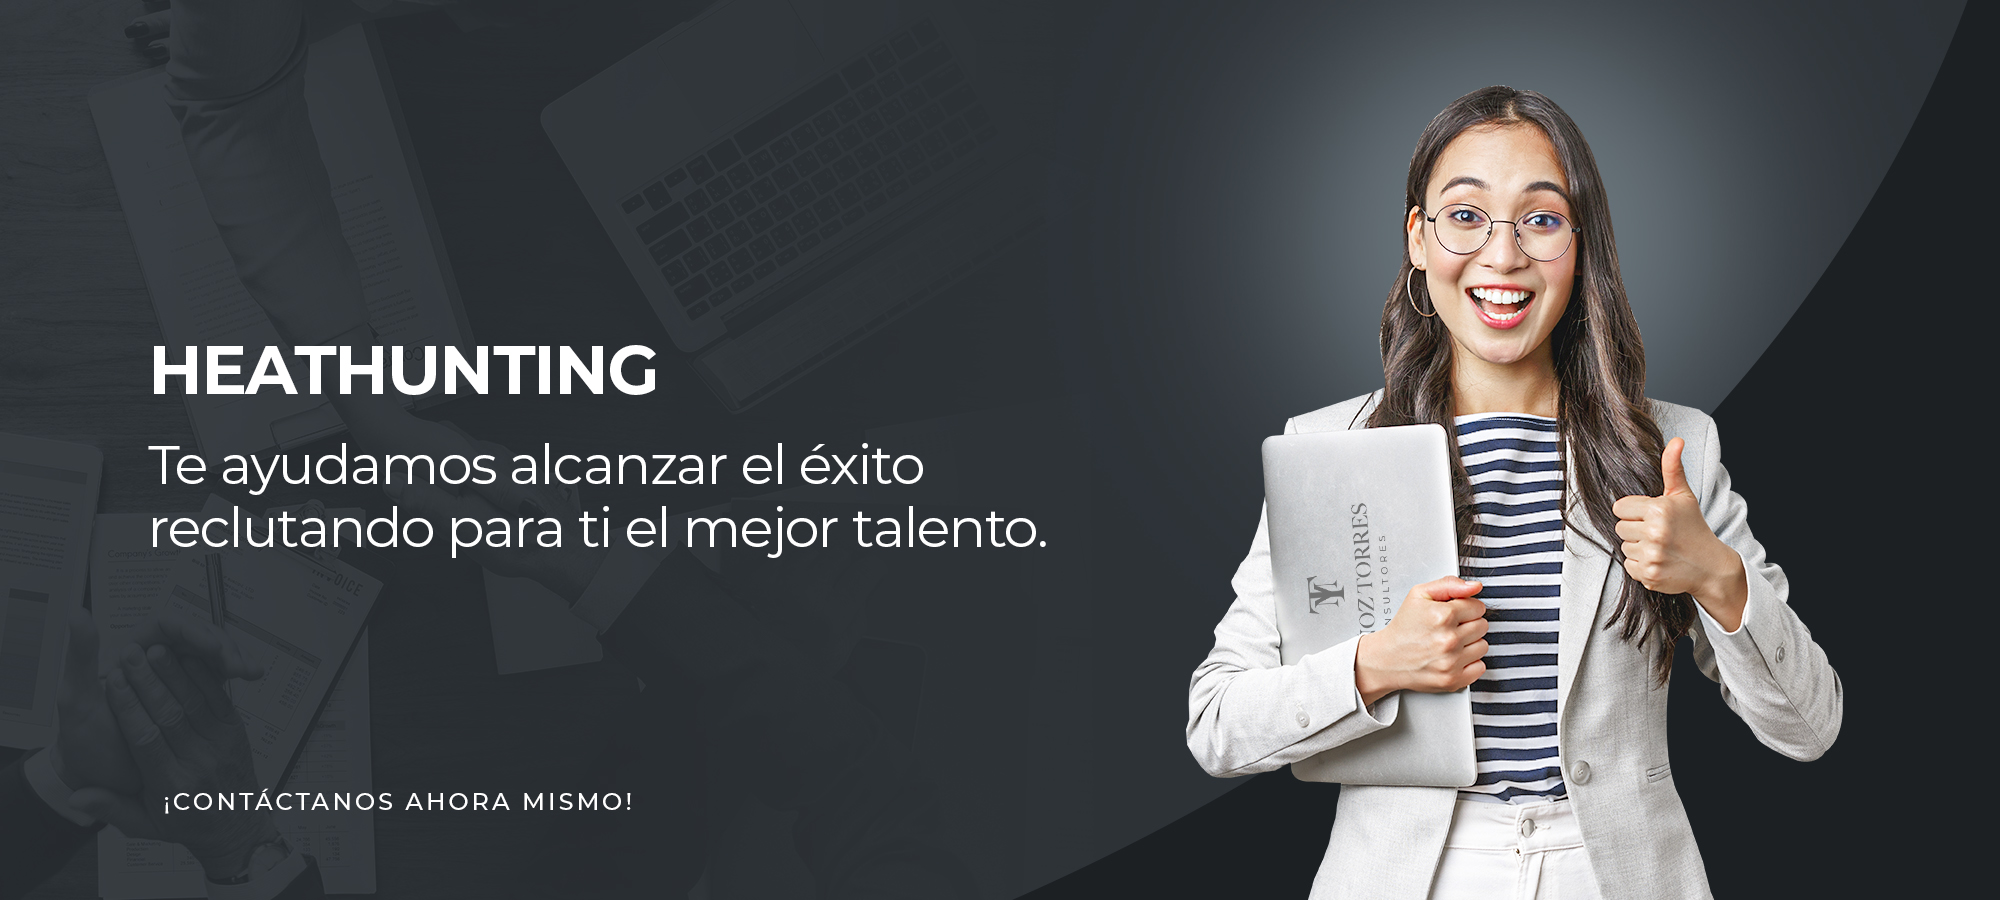 HEADHUNTING_2_MT CONSULTORES_vLAP